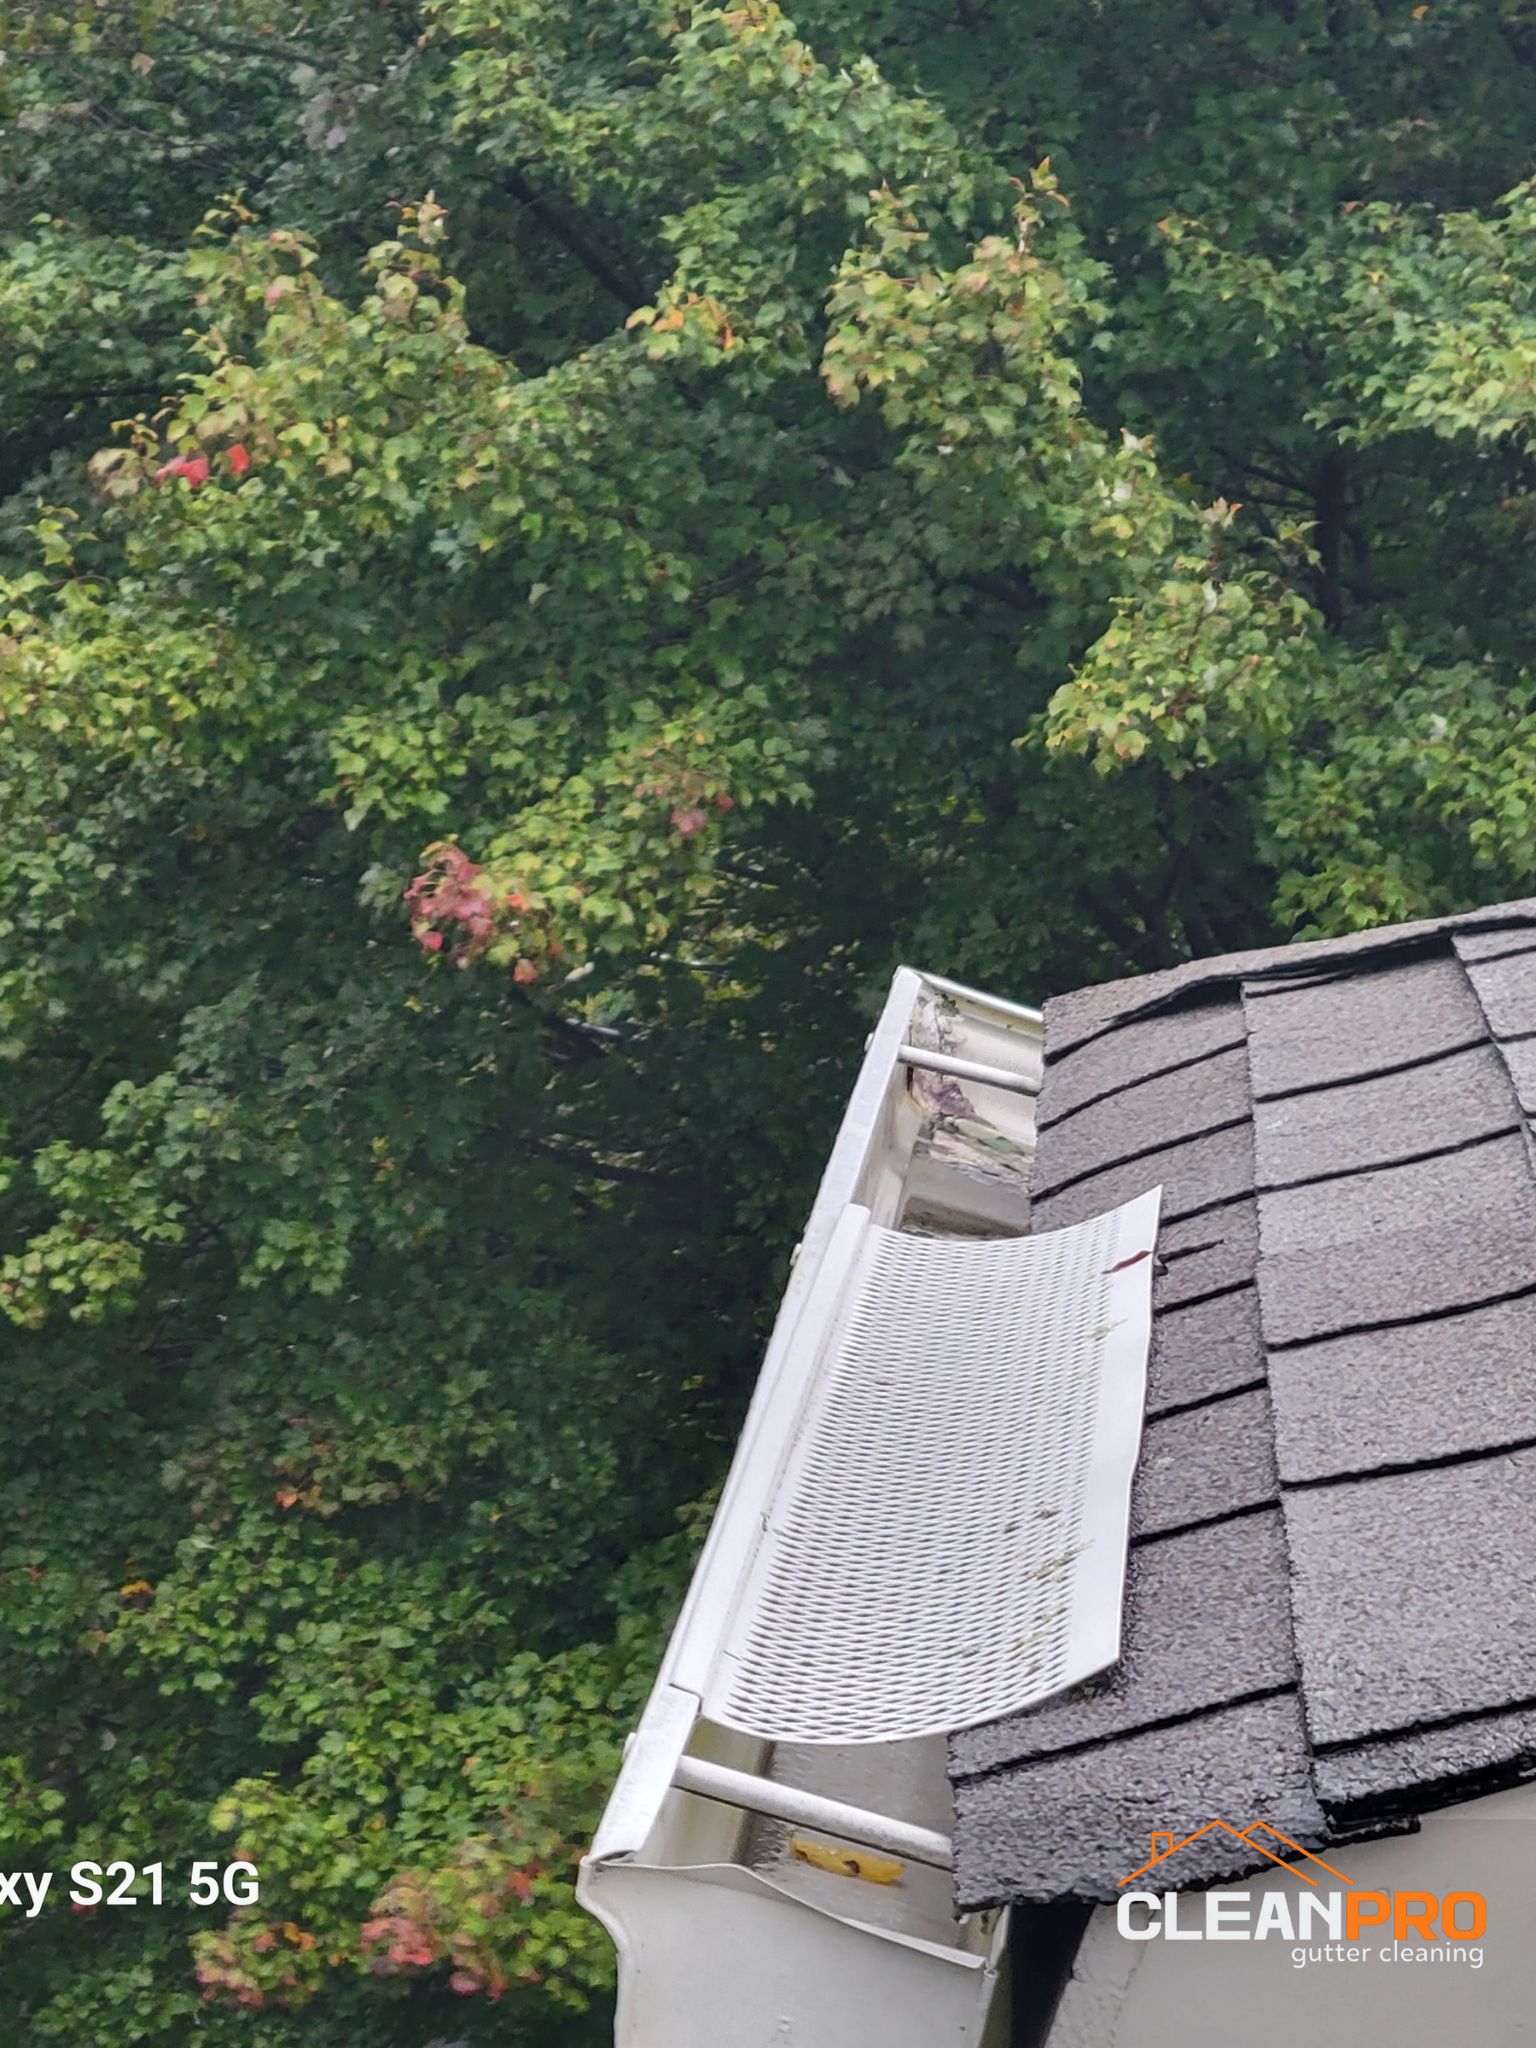 Quality Gutter Cleaning in Columbus OH